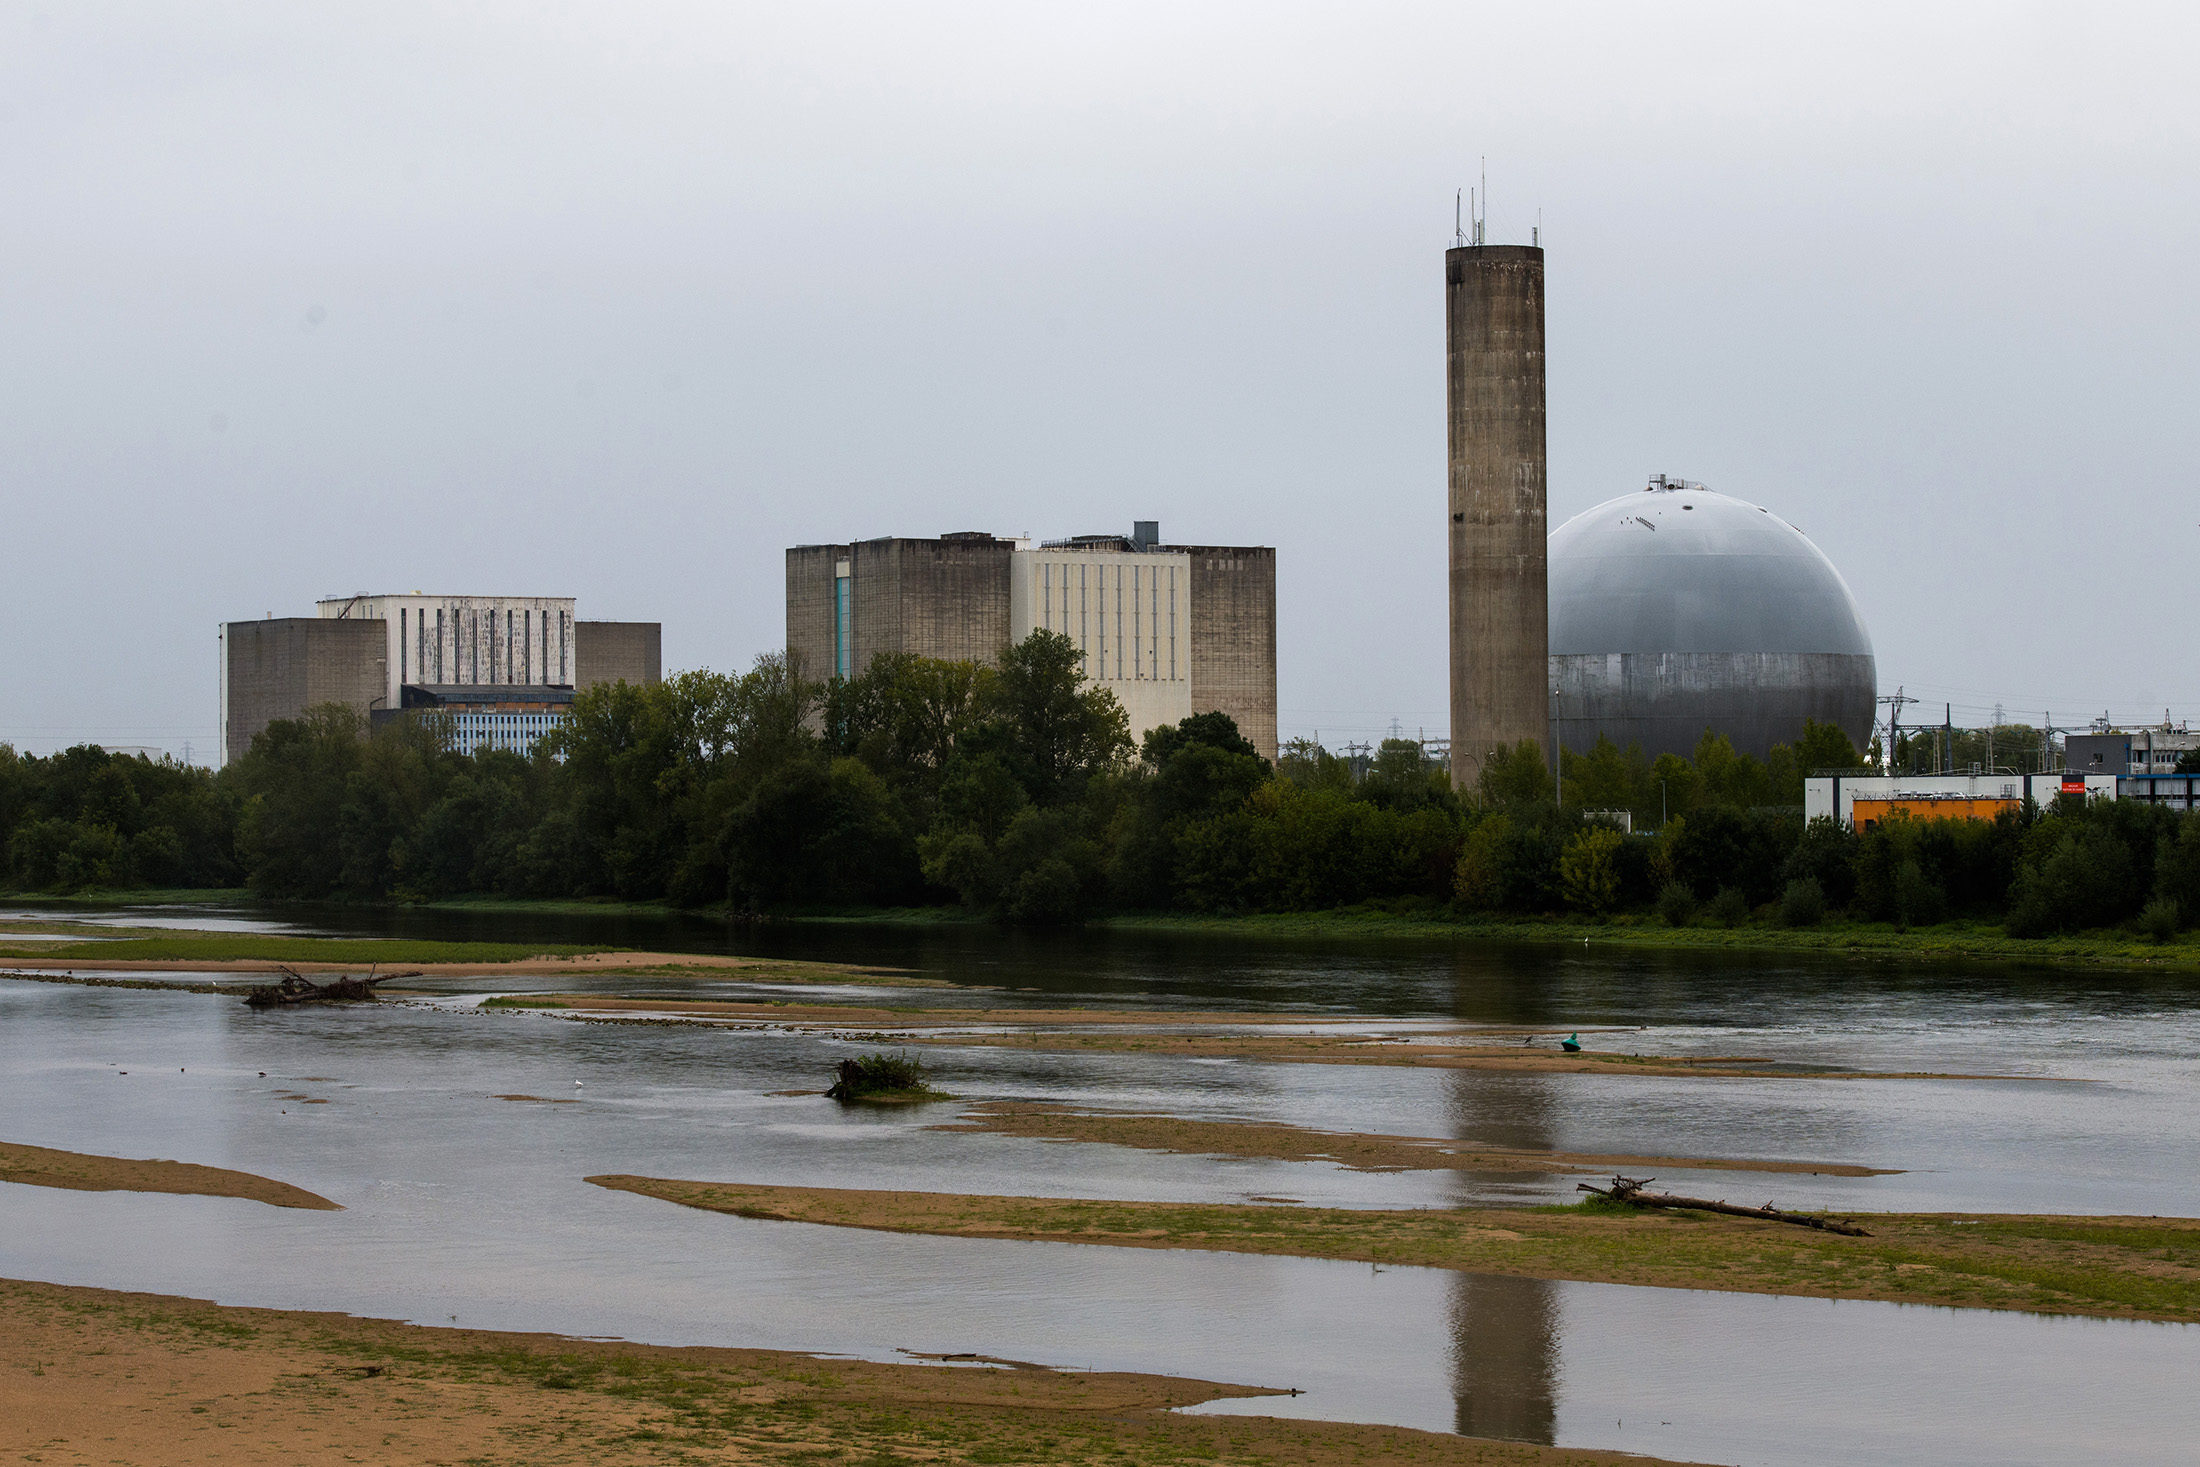 Steam rises from the Chinon Nuclear Power Plant, operated by Electricite de France SA (EDF), beyond the River Loire in Avoine, France, on Wednesday, Sept. 8, 2022. 